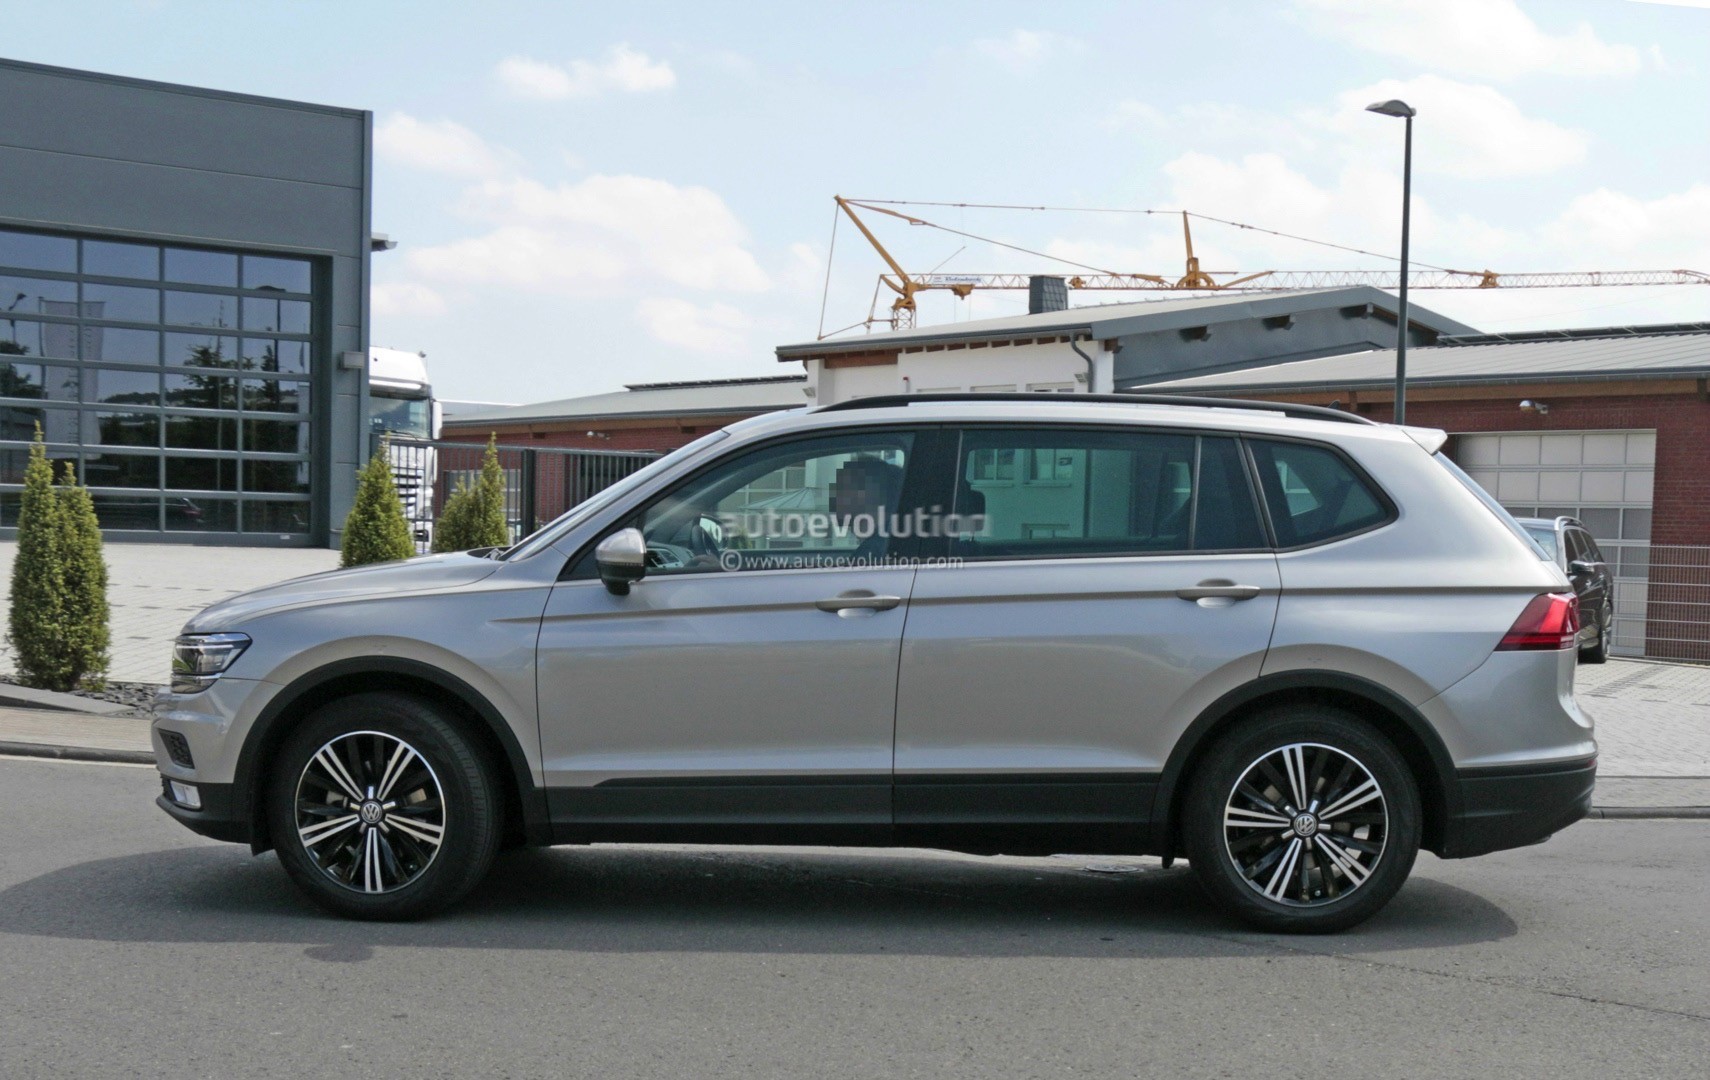 2017 Volkswagen Tiguan XL Spied Without Camouflage, Looks Exactly As ...